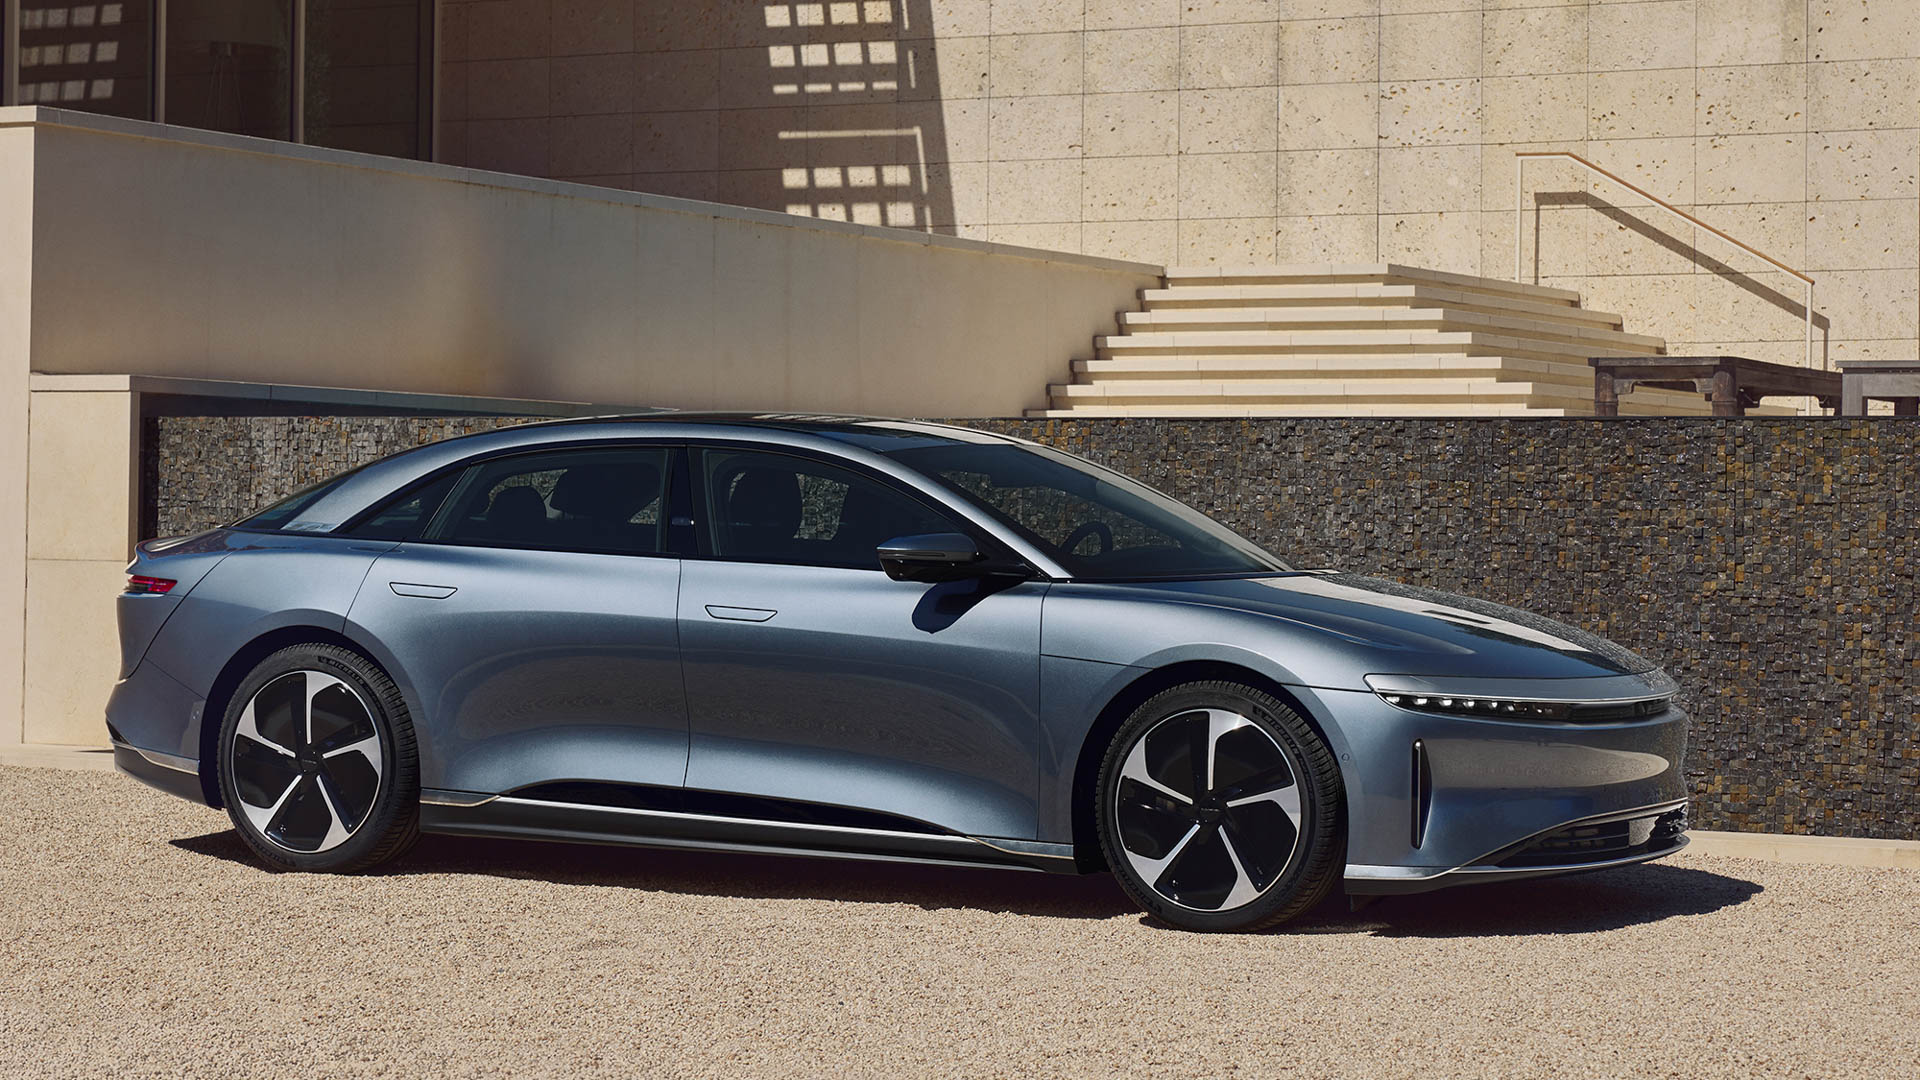 Lucid Air Price Slashed to Undercut Tesla Model S by $5,000